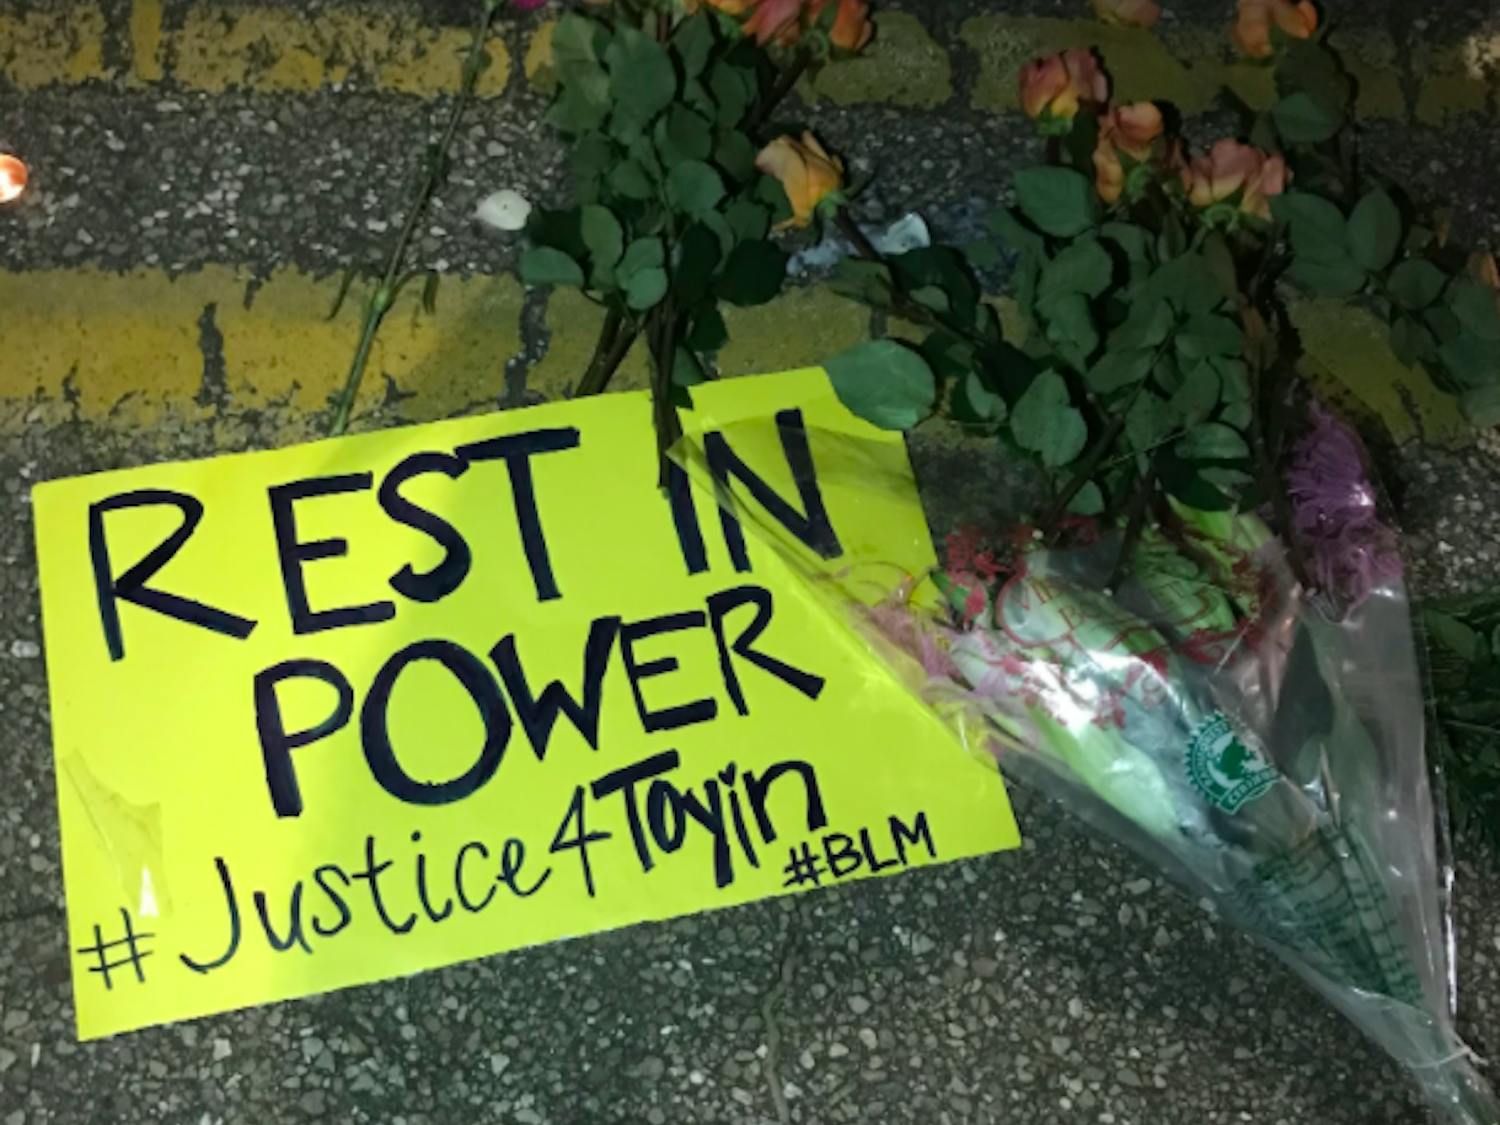 A poster that reads “REST IN POWER” and “#Justice4Toyin #BLM” lays on Monday Road in Tallahassee next to a row of flowers and candles.